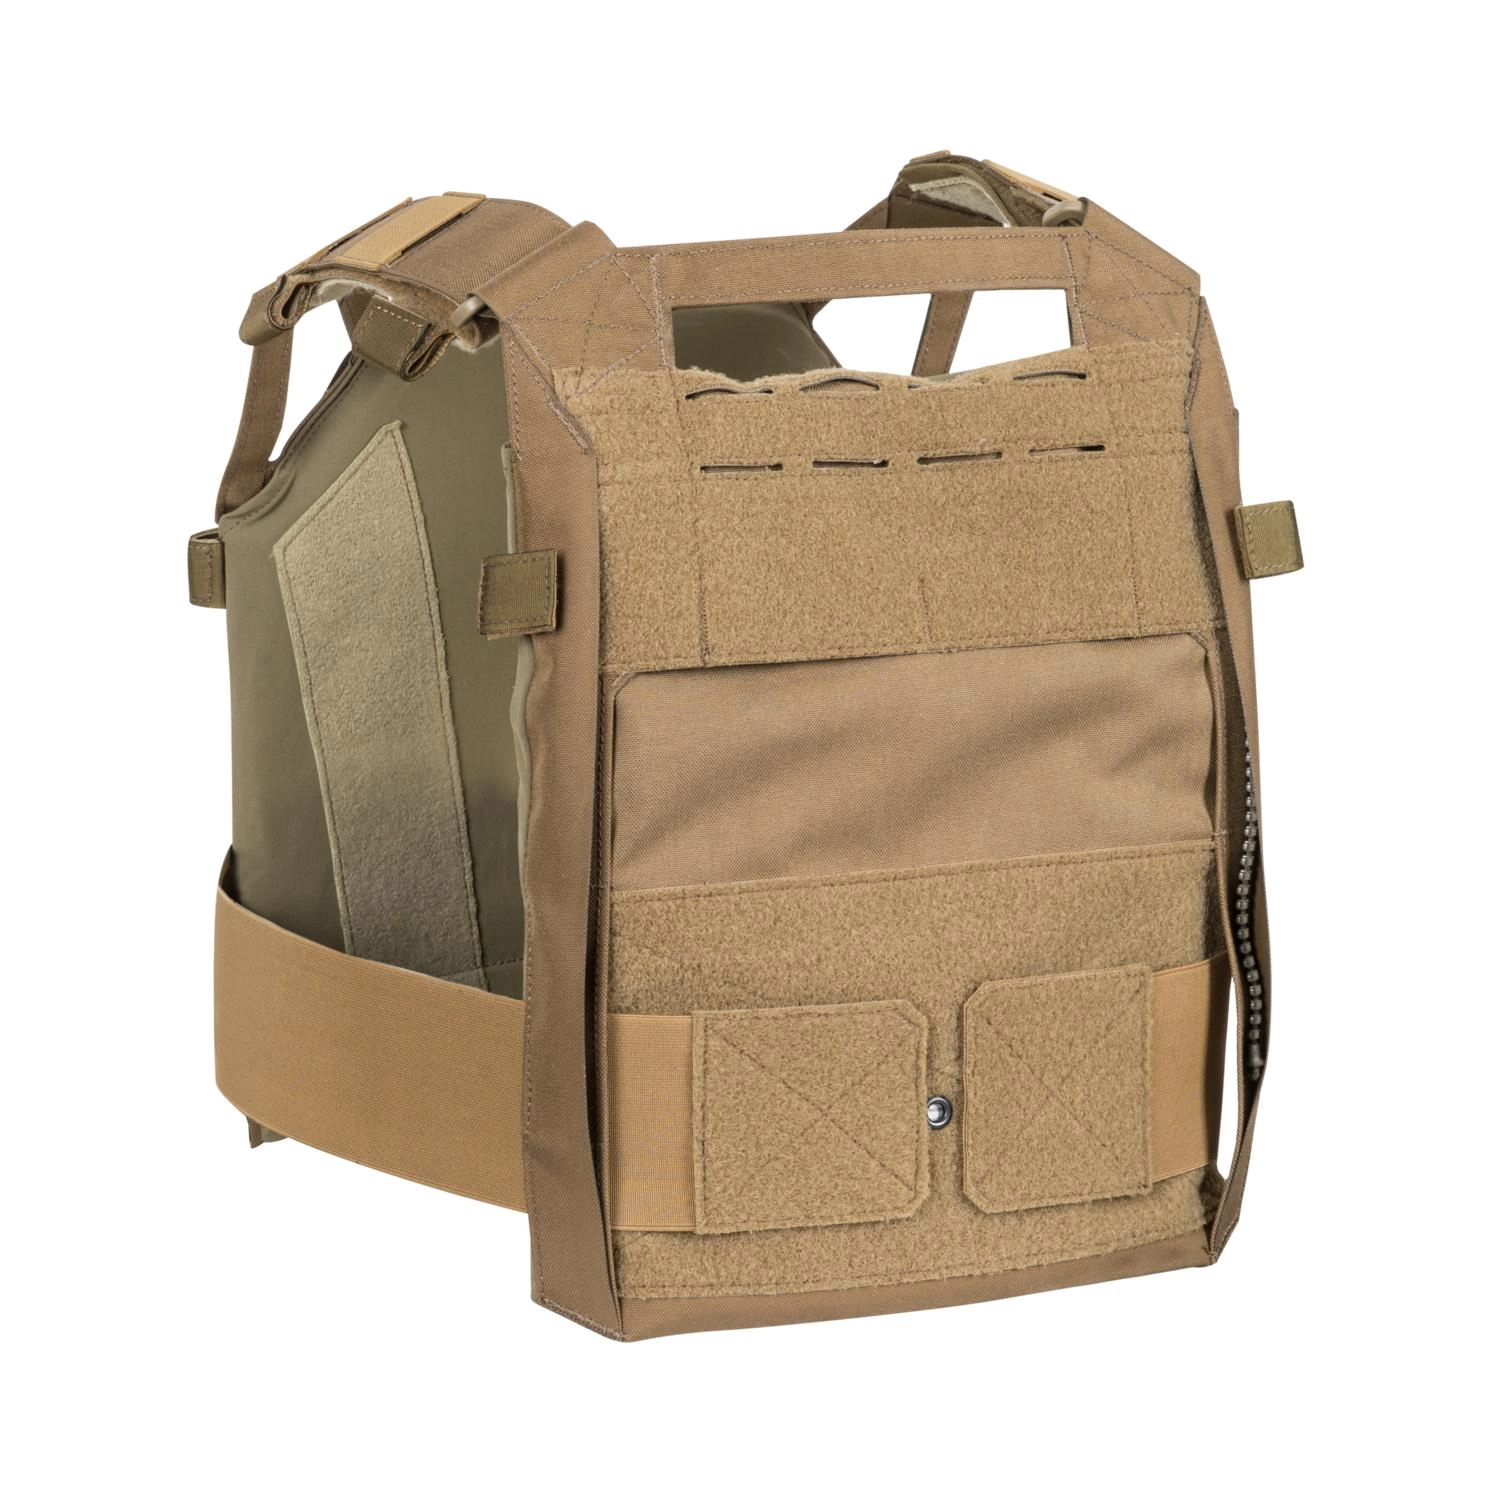 Direct Action SPITFIRE MK II Plate Carrier - Adaptive Green